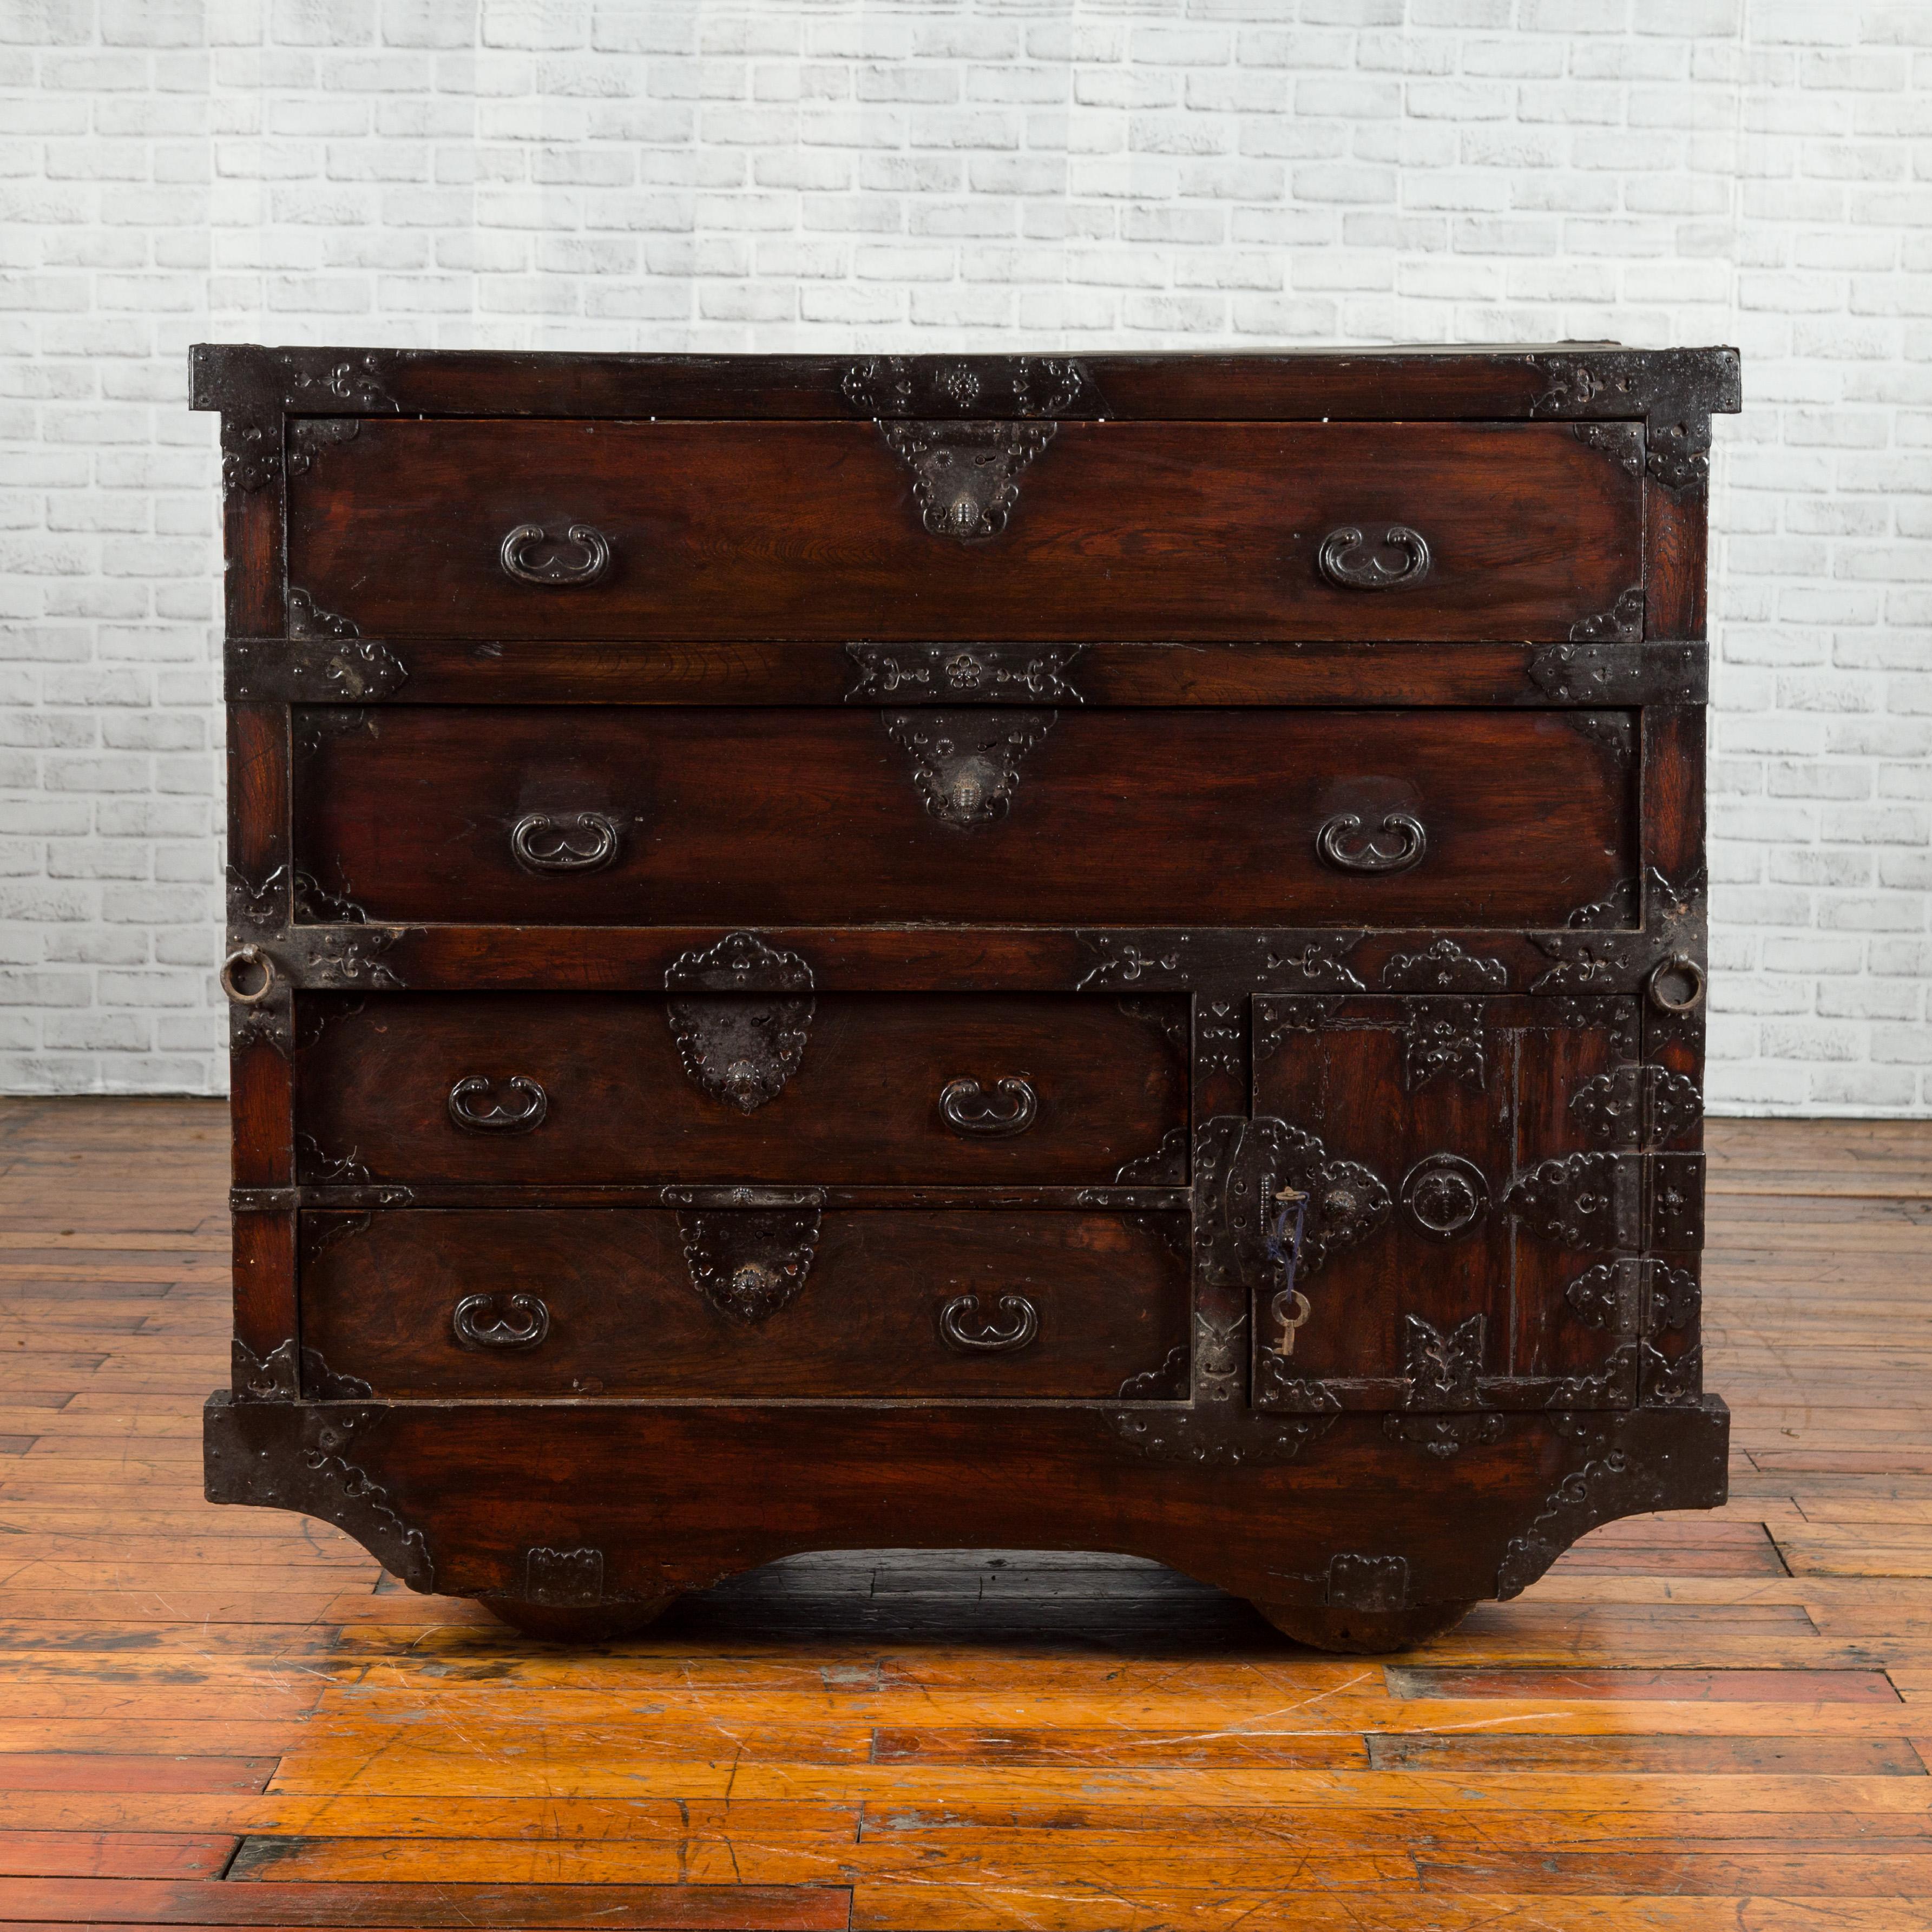 A Japanese merchant's chest from the 19th century, with four large drawers and a lateral door concealing additional drawers. Created in Japan during the 19th century, this merchant's chest features a dark brown patina perfectly complimented by